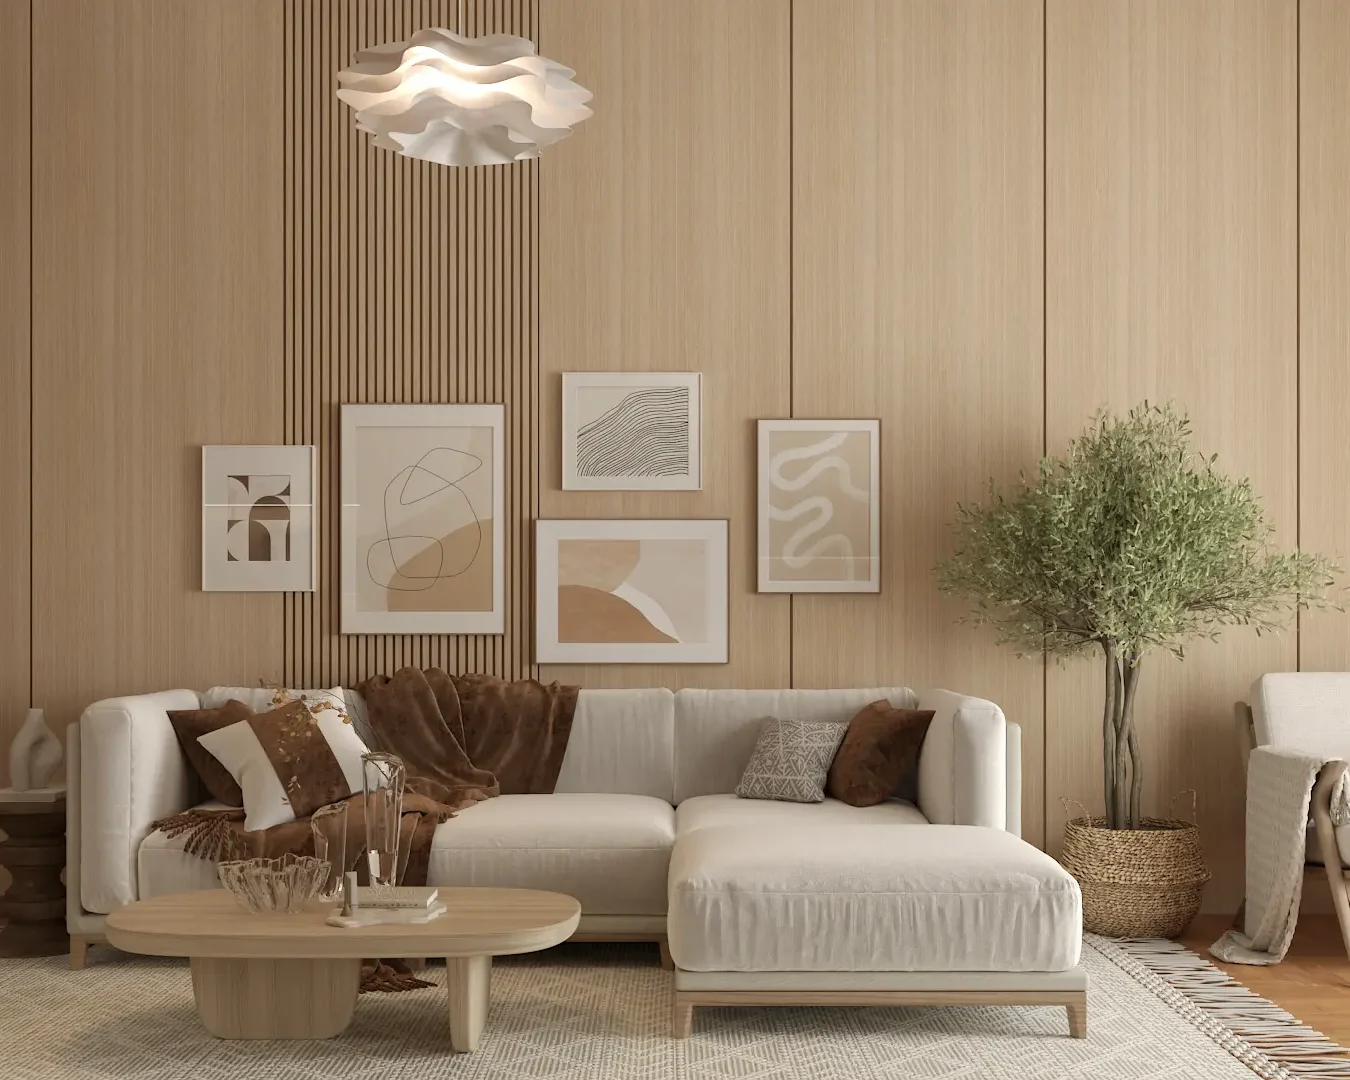 Minimalist living room with a neutral color scheme and a gallery wall of geometric and abstract art pieces, offering a clean and sophisticated aesthetic. Design by Debora, an online interior design service.